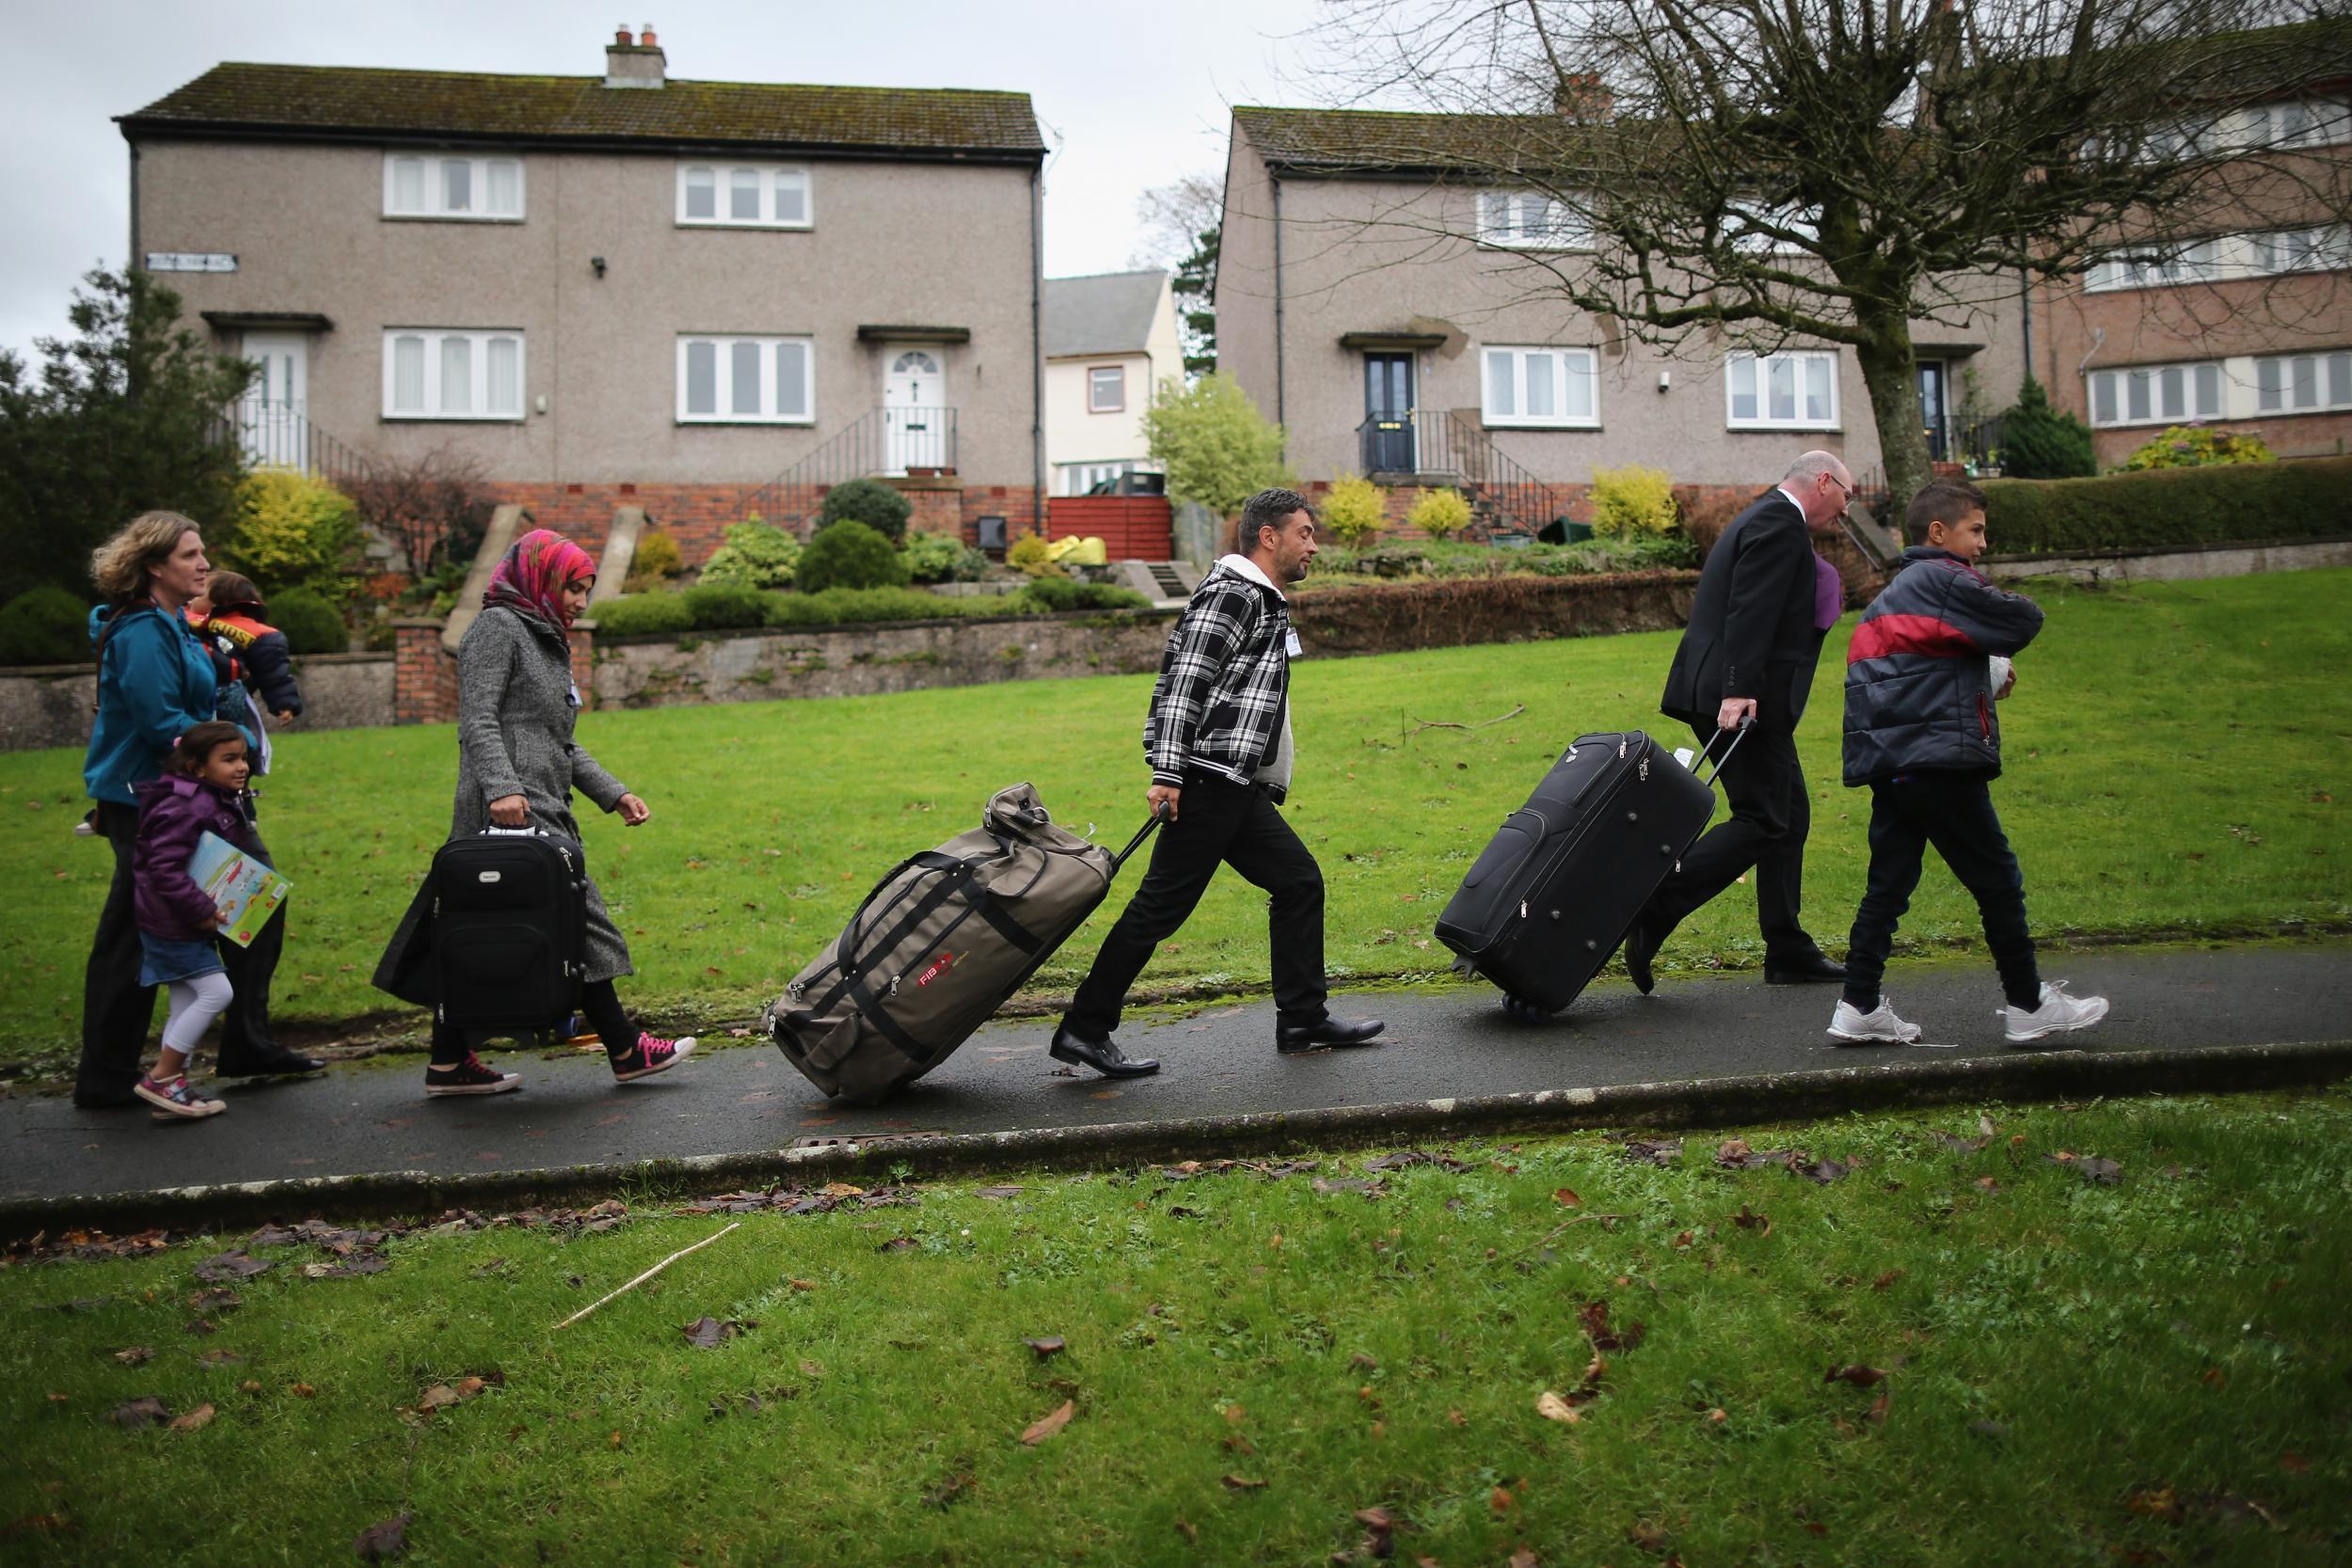 Syrians arrive at their new home on the Isle of Bute in 2015